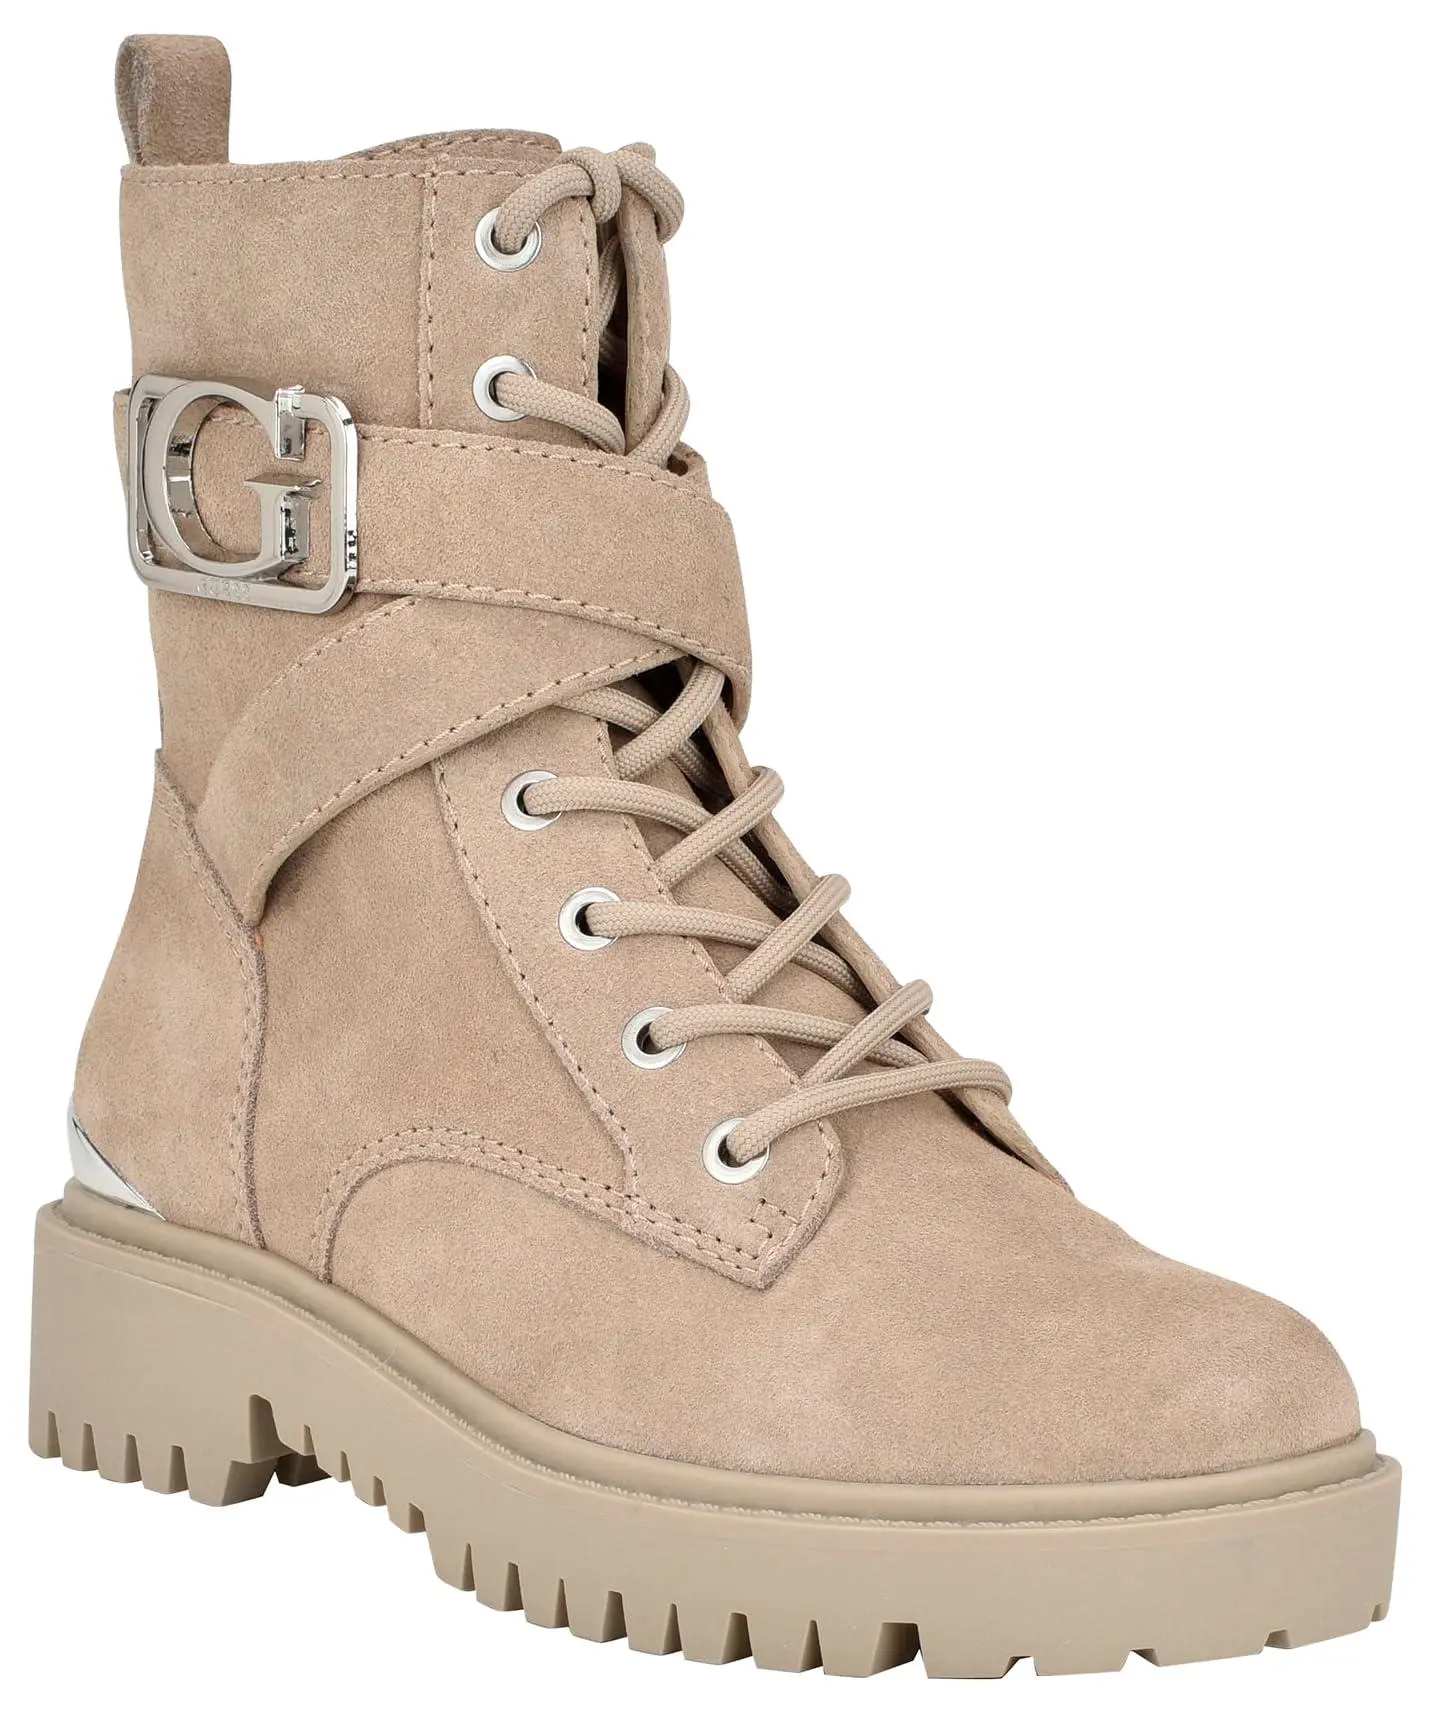 Women's Guess 77 Boots @ Stylight